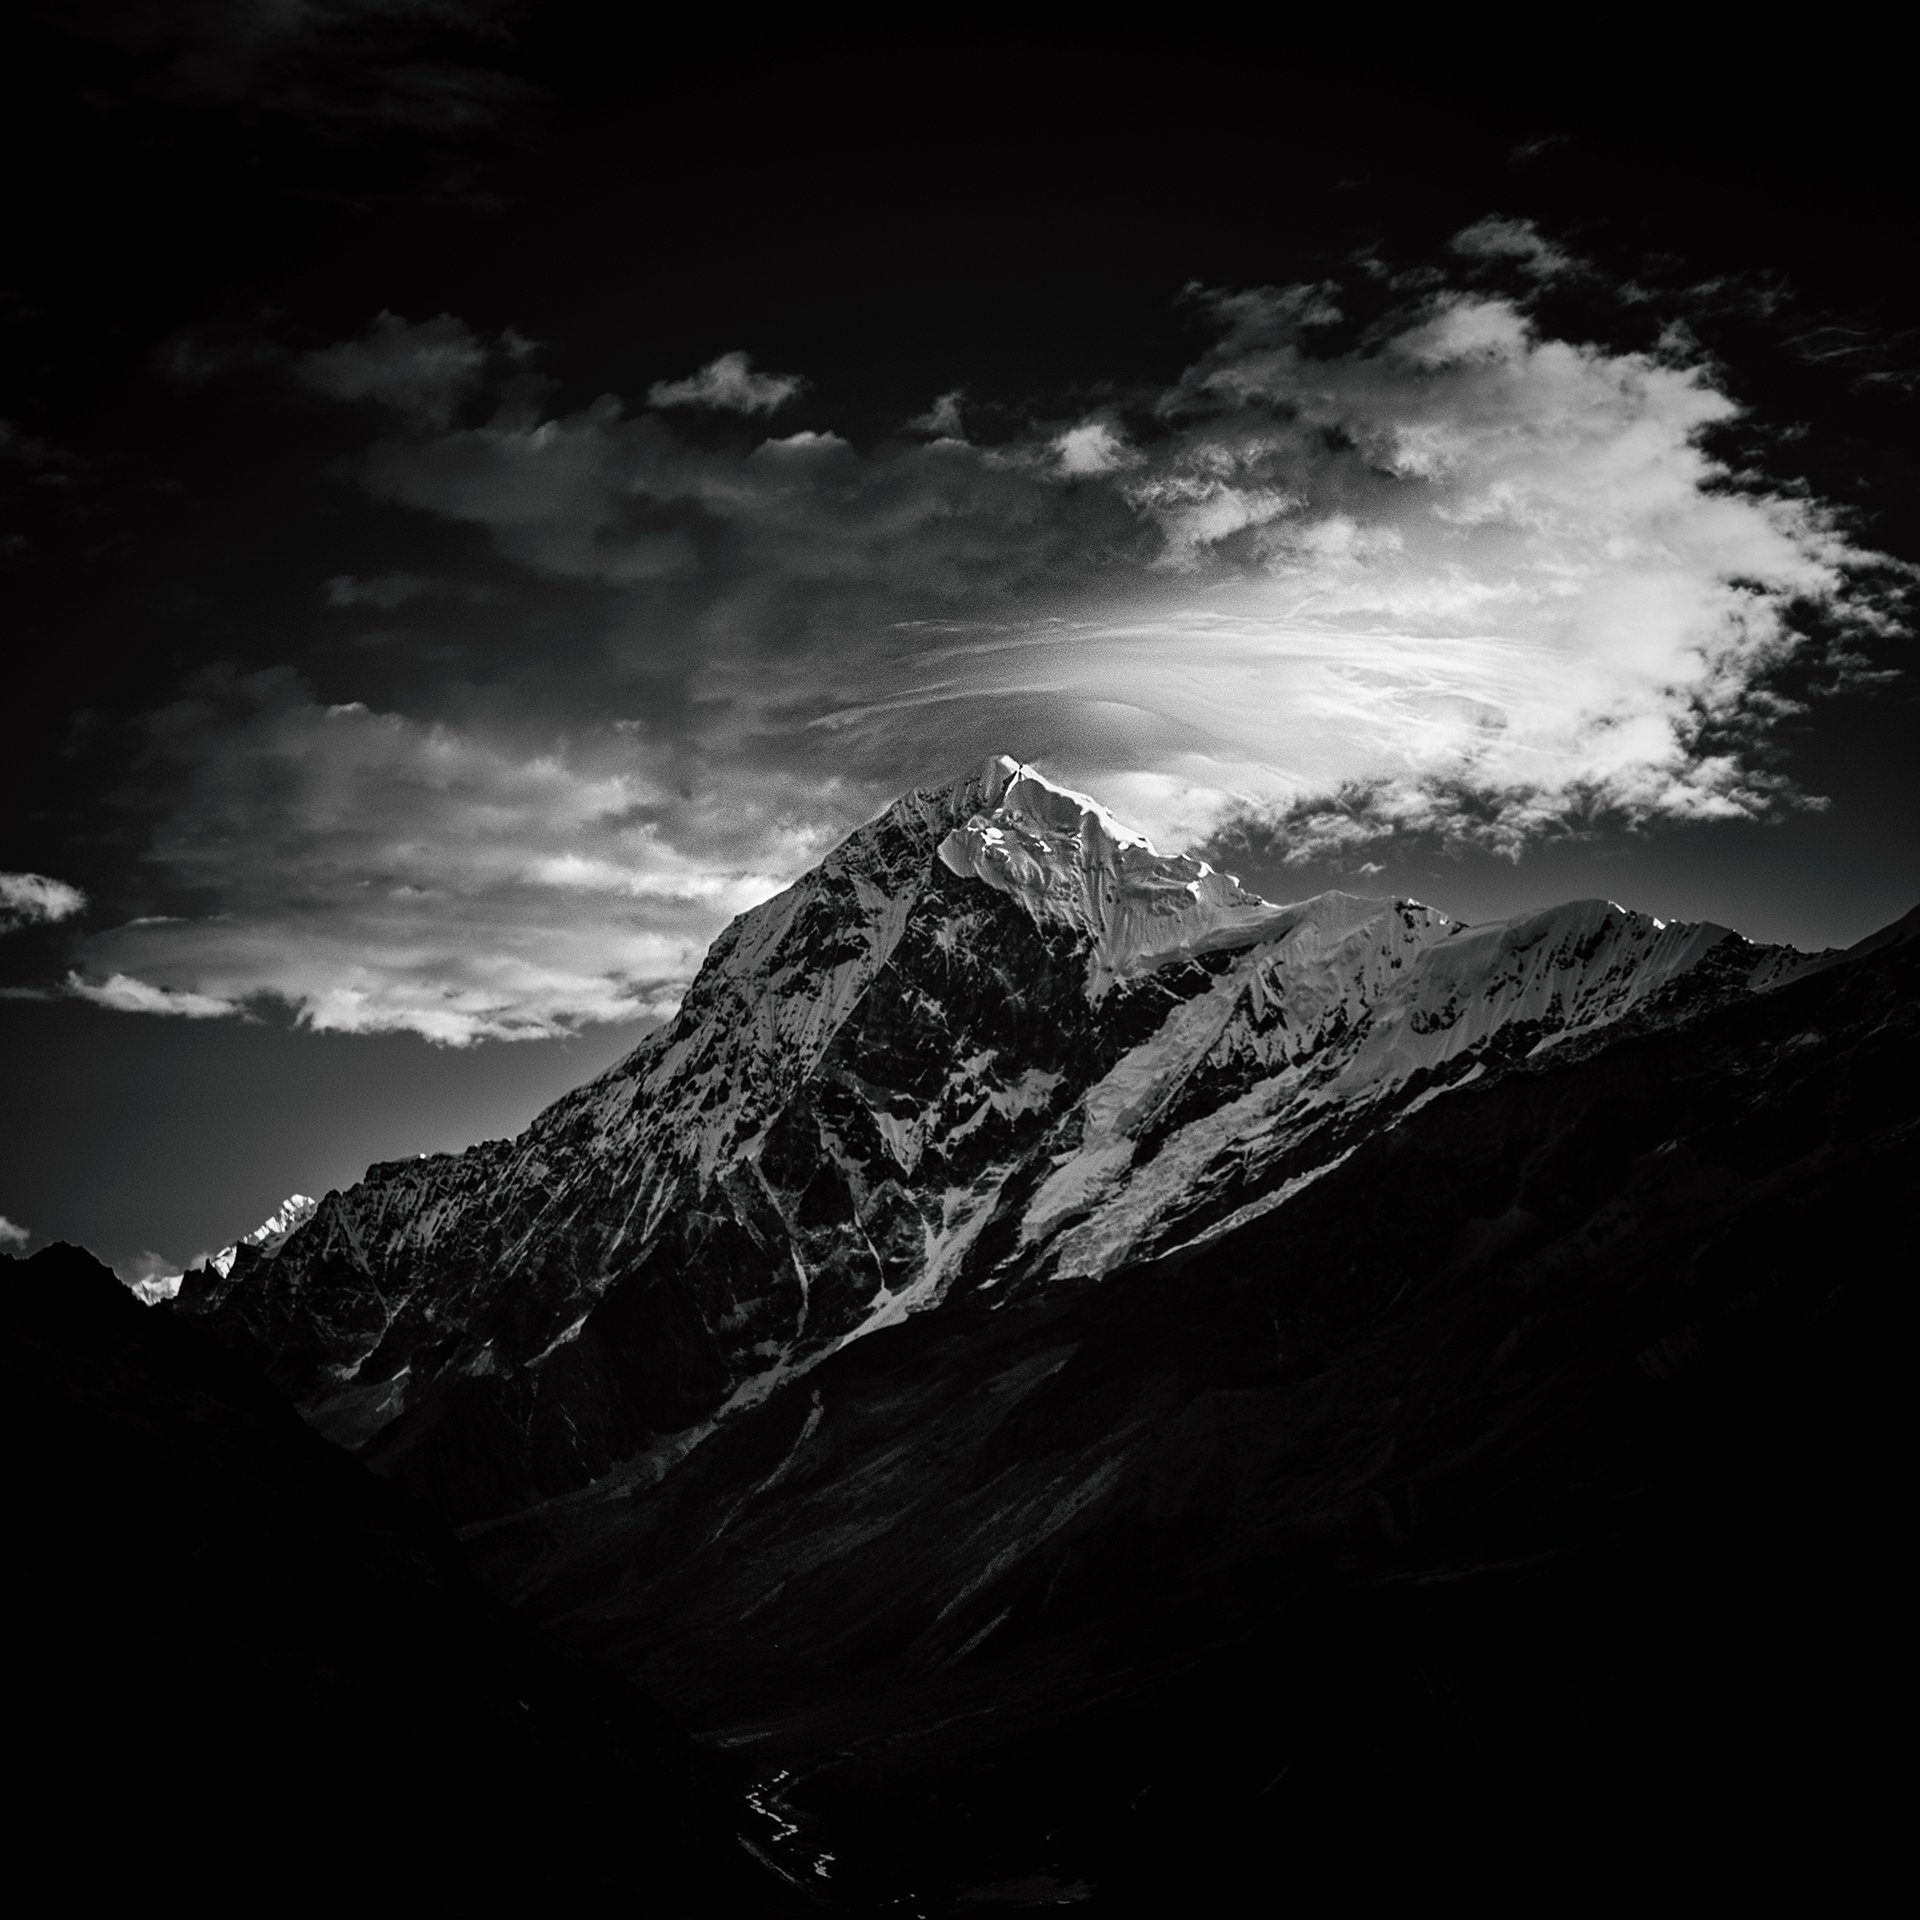 Jayanta Roy's Himalayan Odyssey Is a Hypnotic Black and White Landscape Photo Series